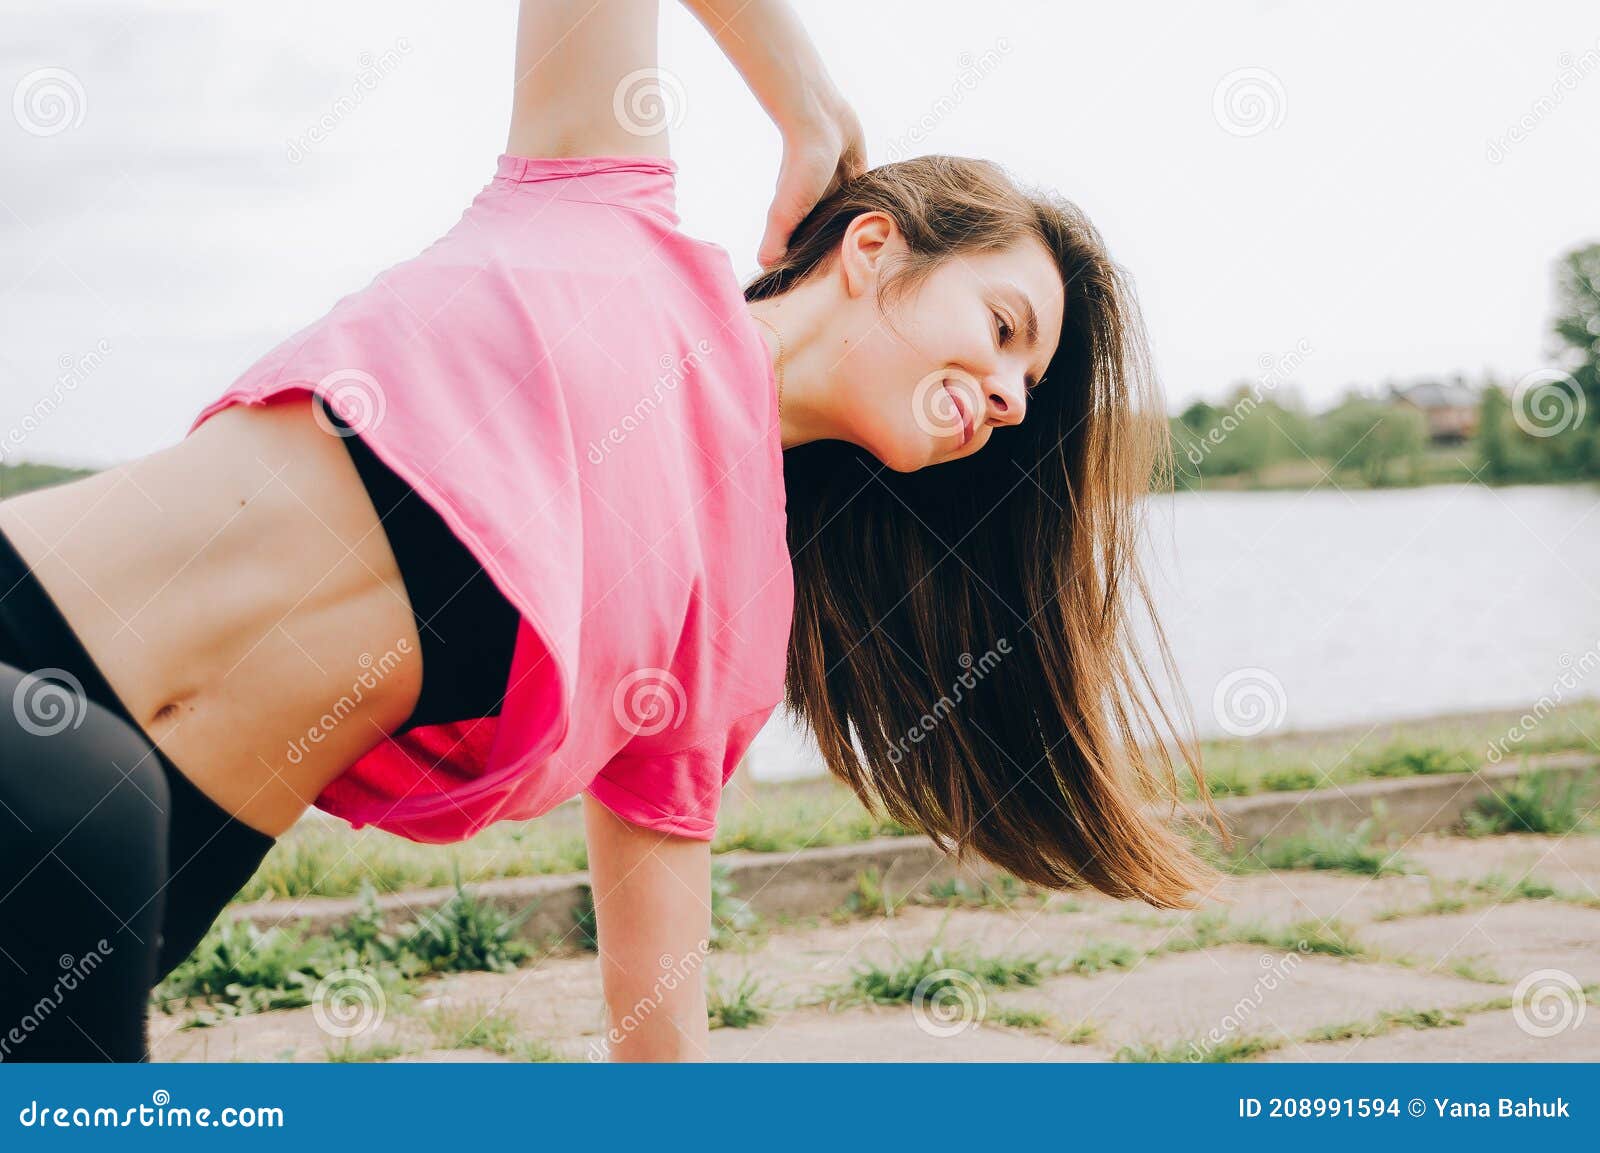 young beautiful girl athlete jogging. beautiful girl athlete is engaged in jogging. morning running. healthy sport lifestyle